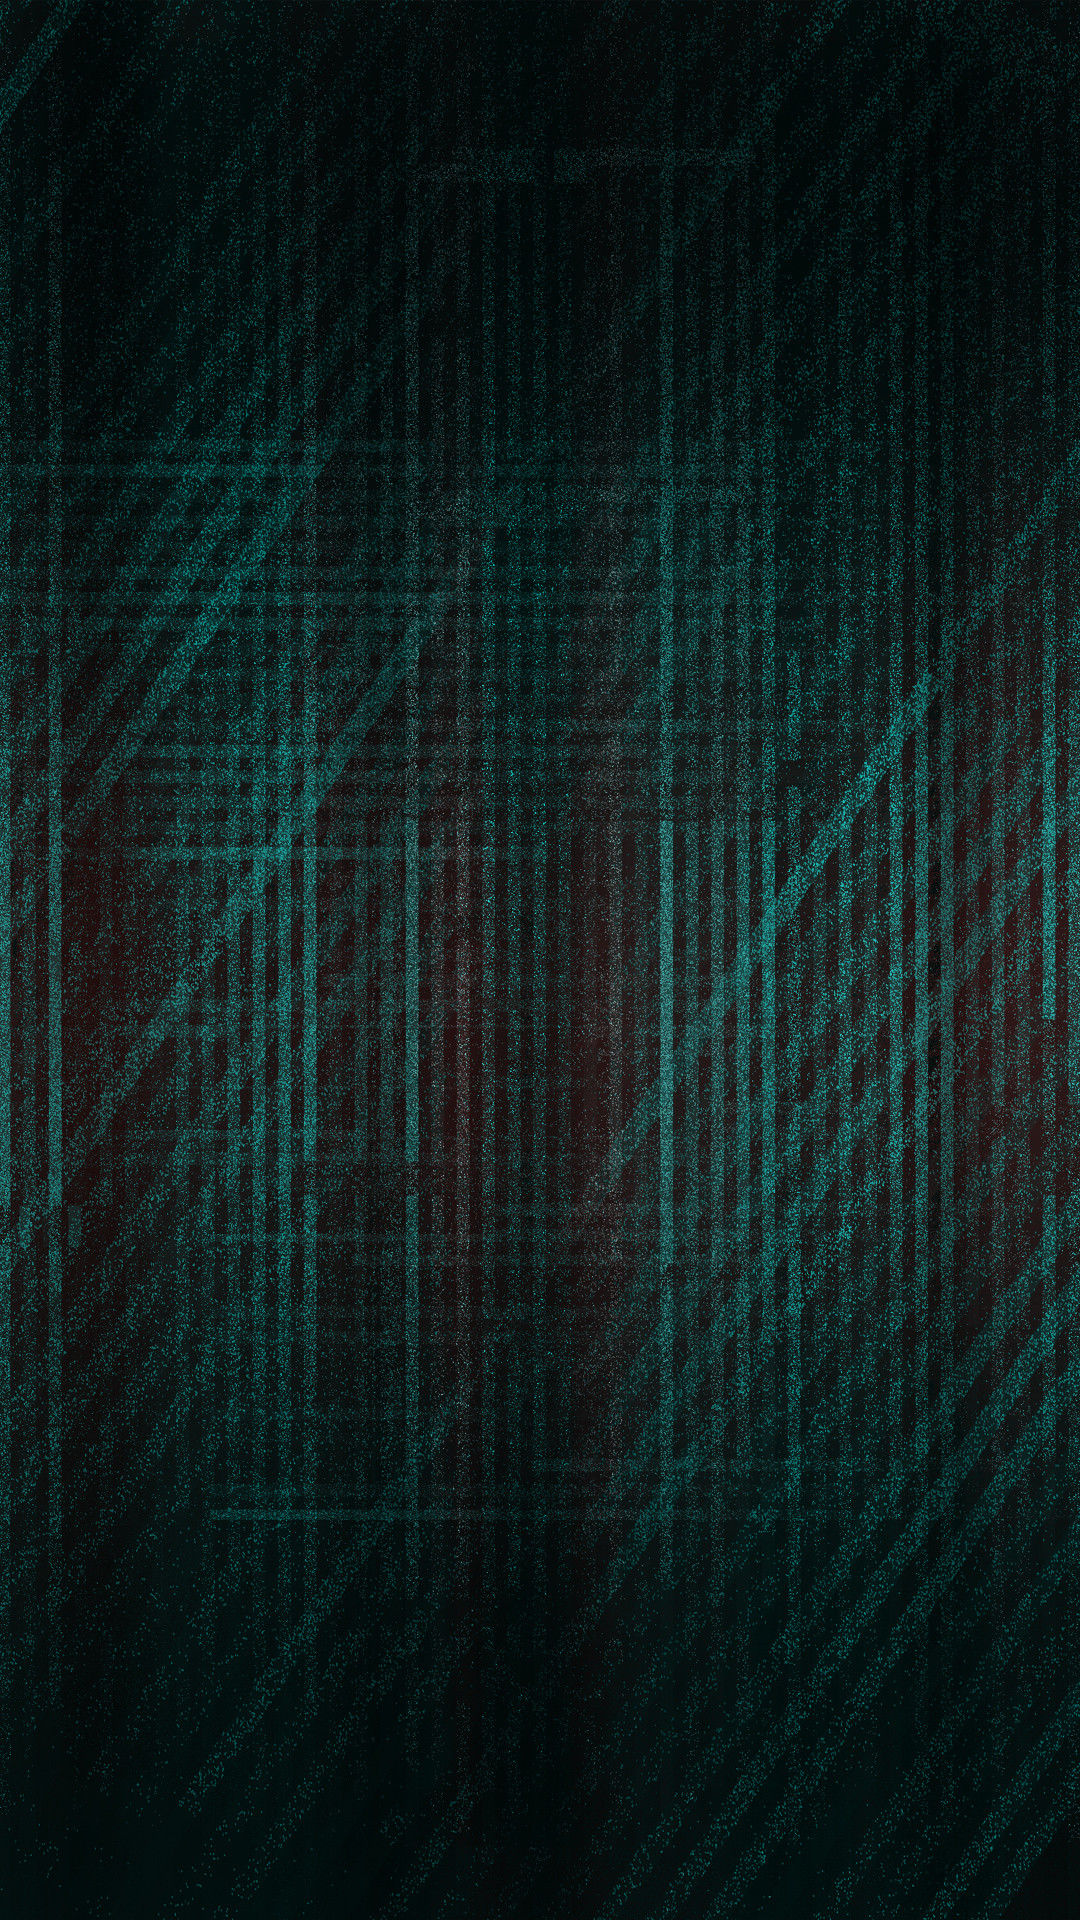 htc live wallpaper,green,pattern,turquoise,text,line